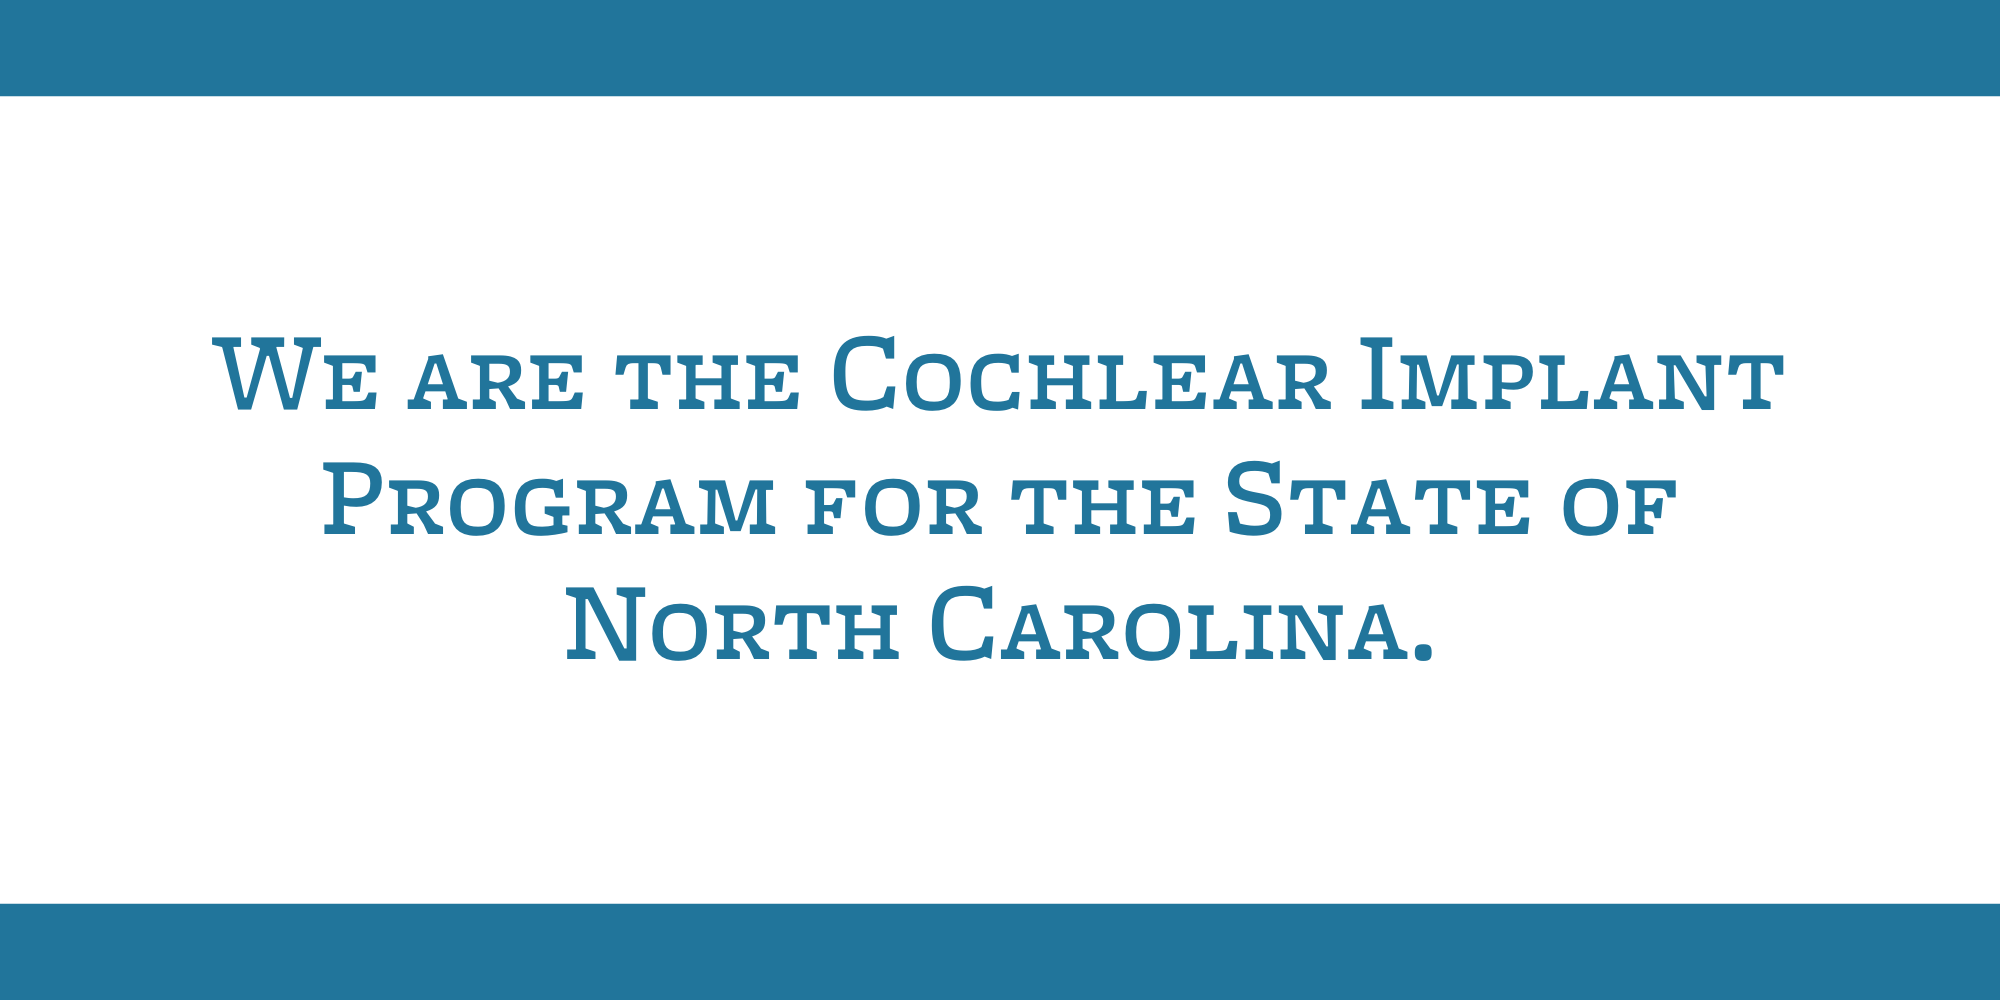 We are the Cochlear Implant Program for the State of North Carolina.